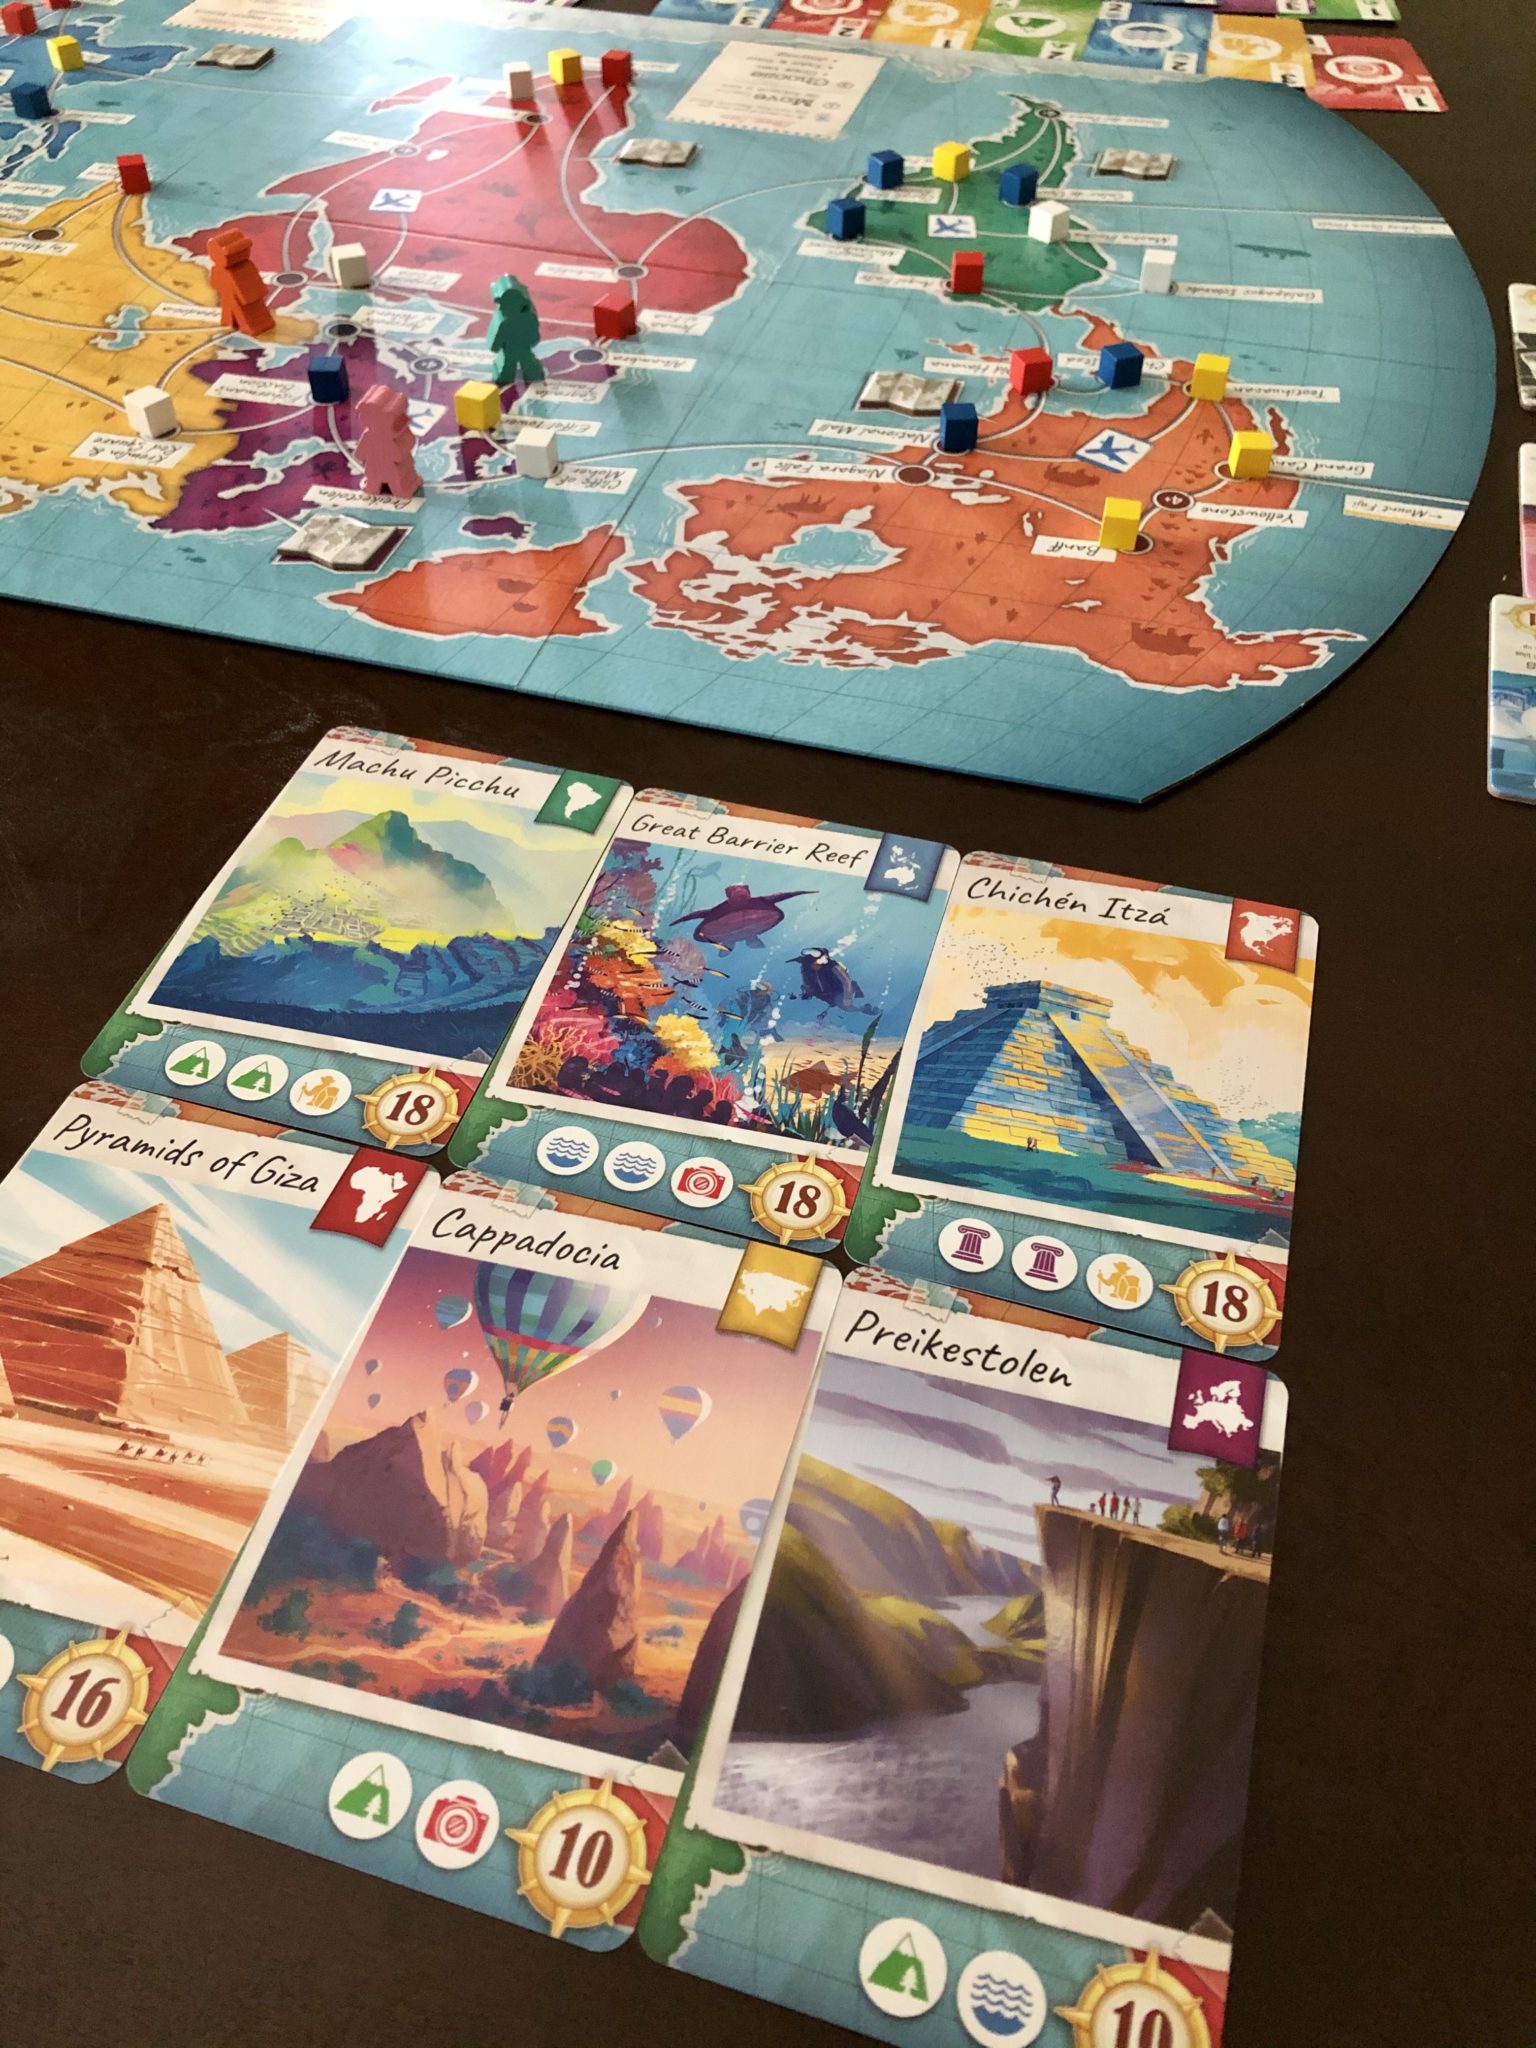 Trekking The World board and sample destination cards